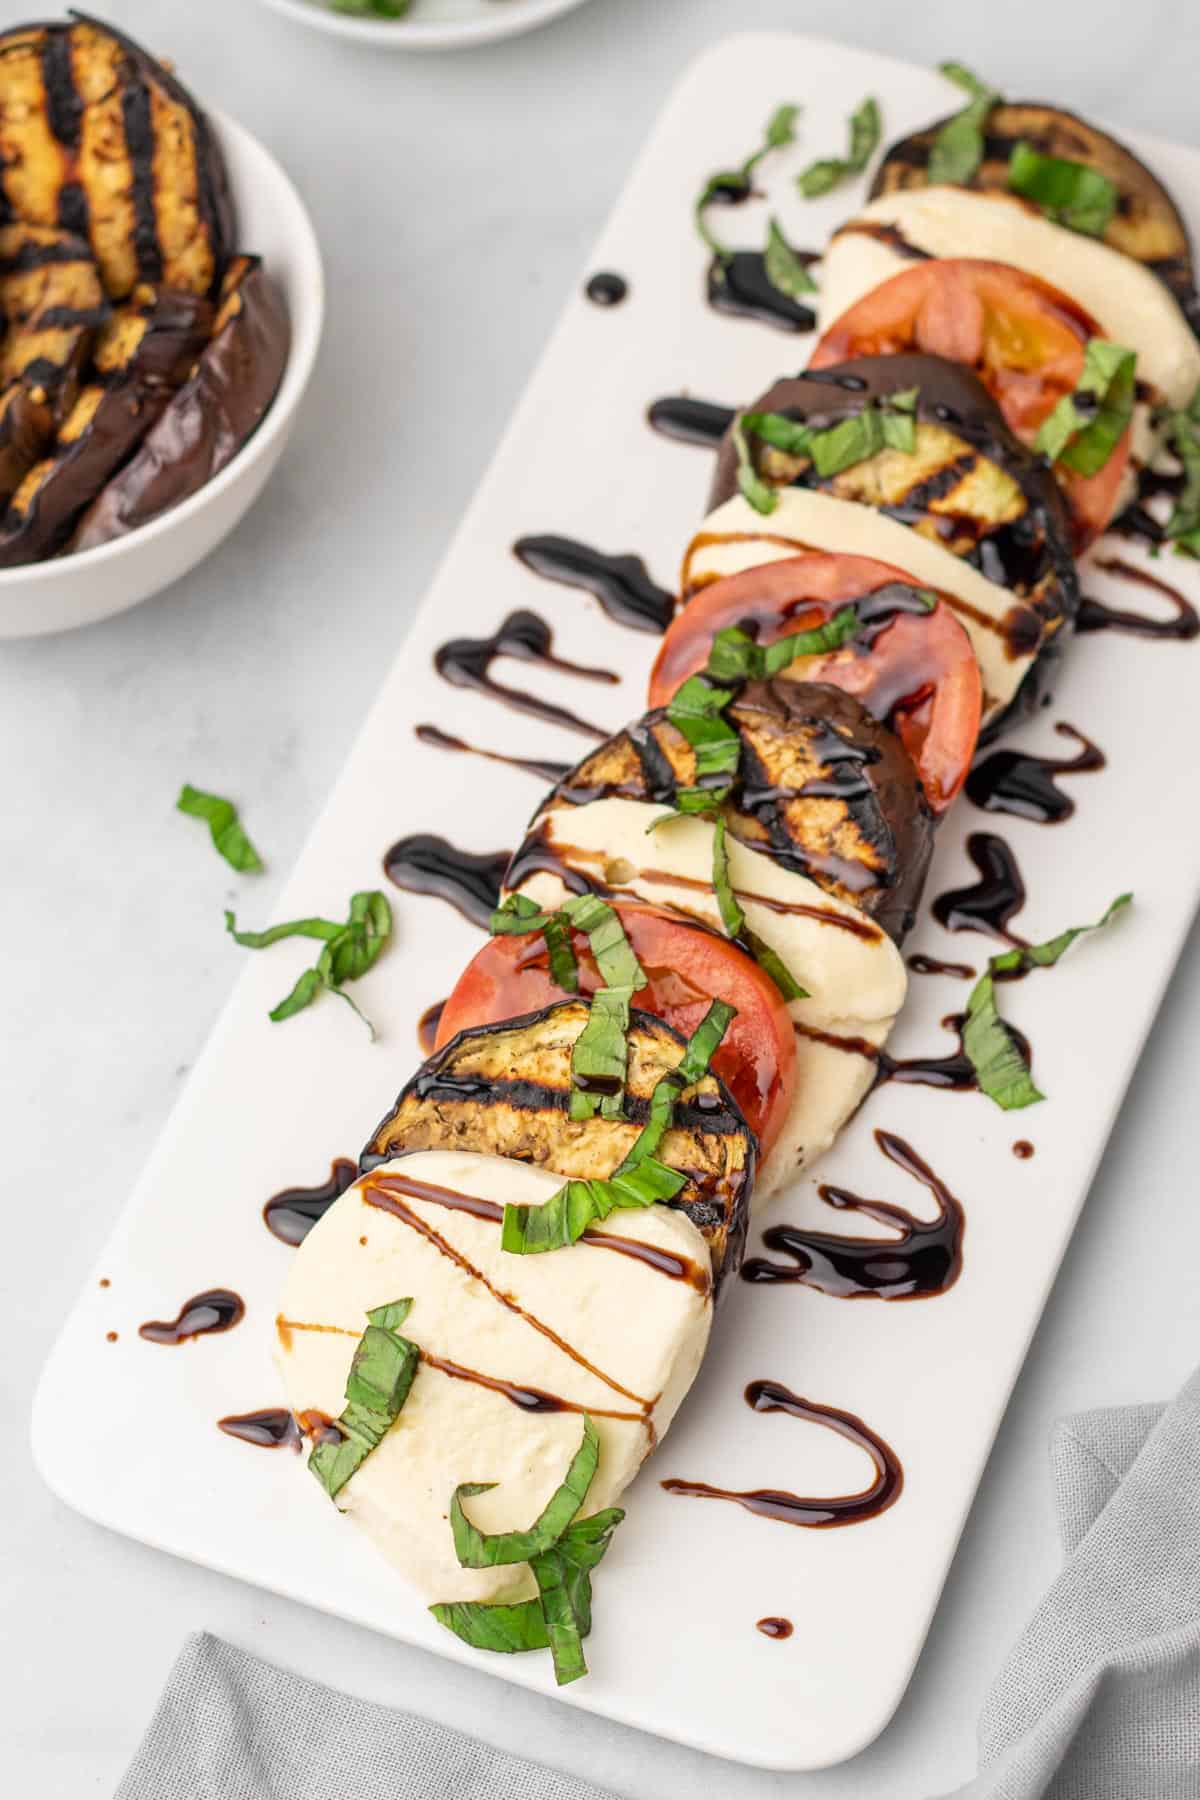 Eggplant caprese salad on a white serving dish garnished with balsamic and fresh cut basil